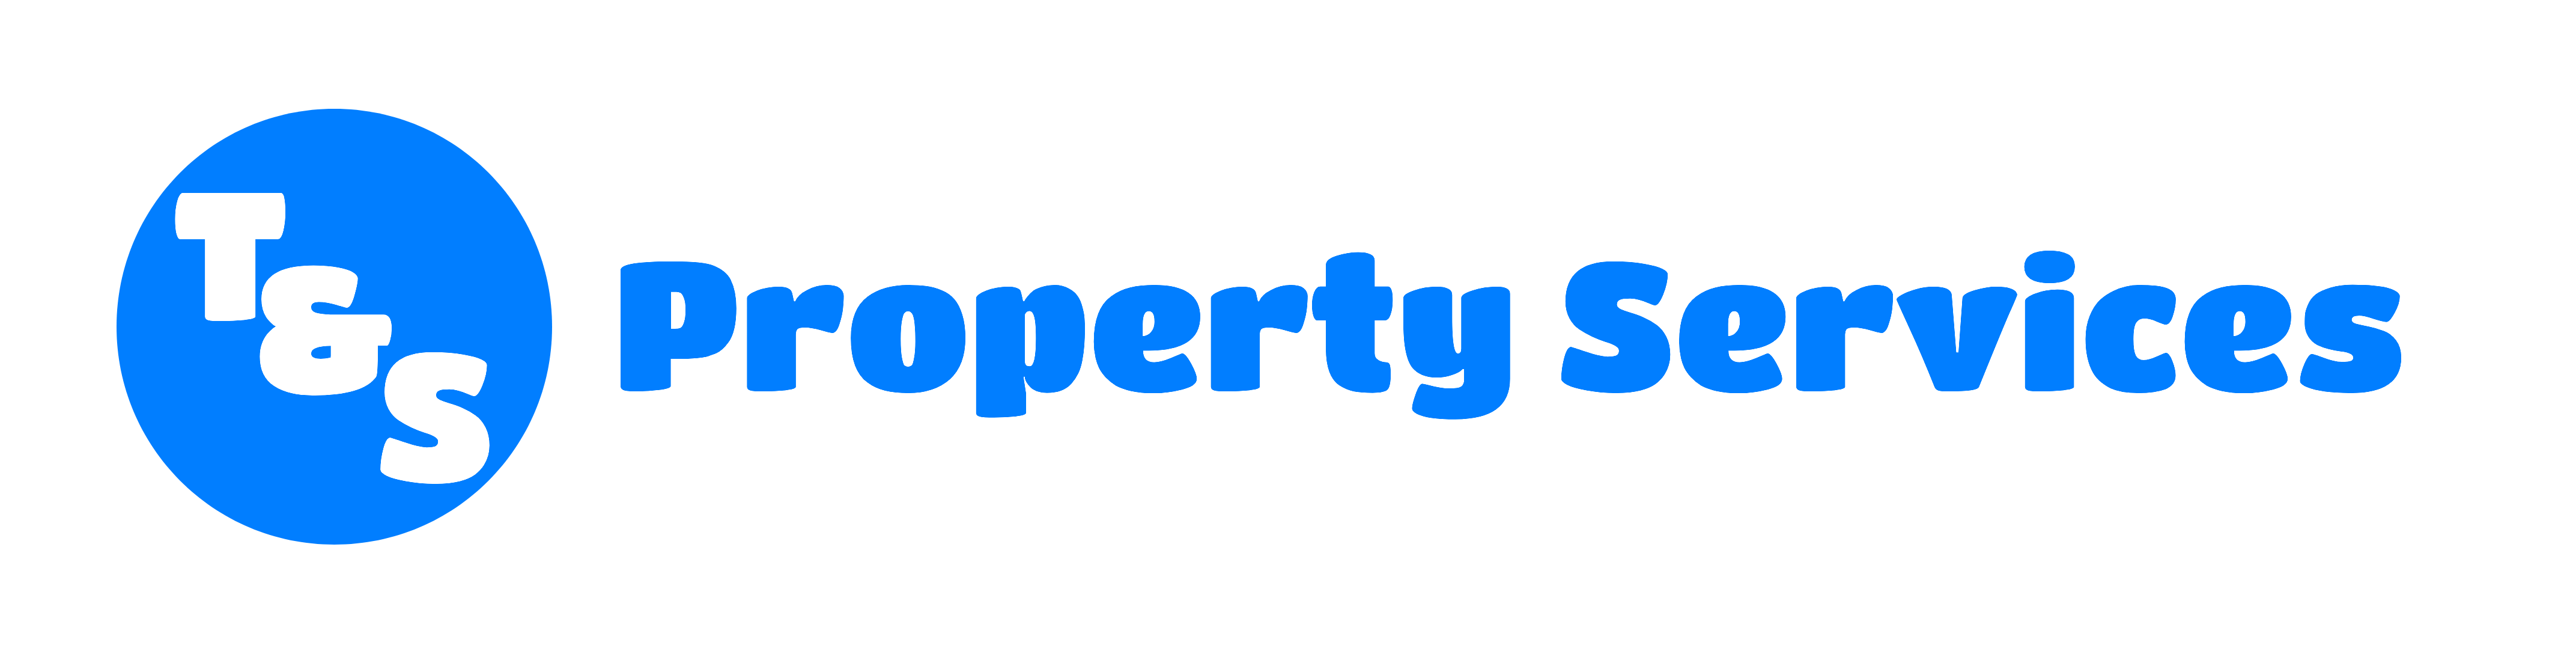 T&S Property Services